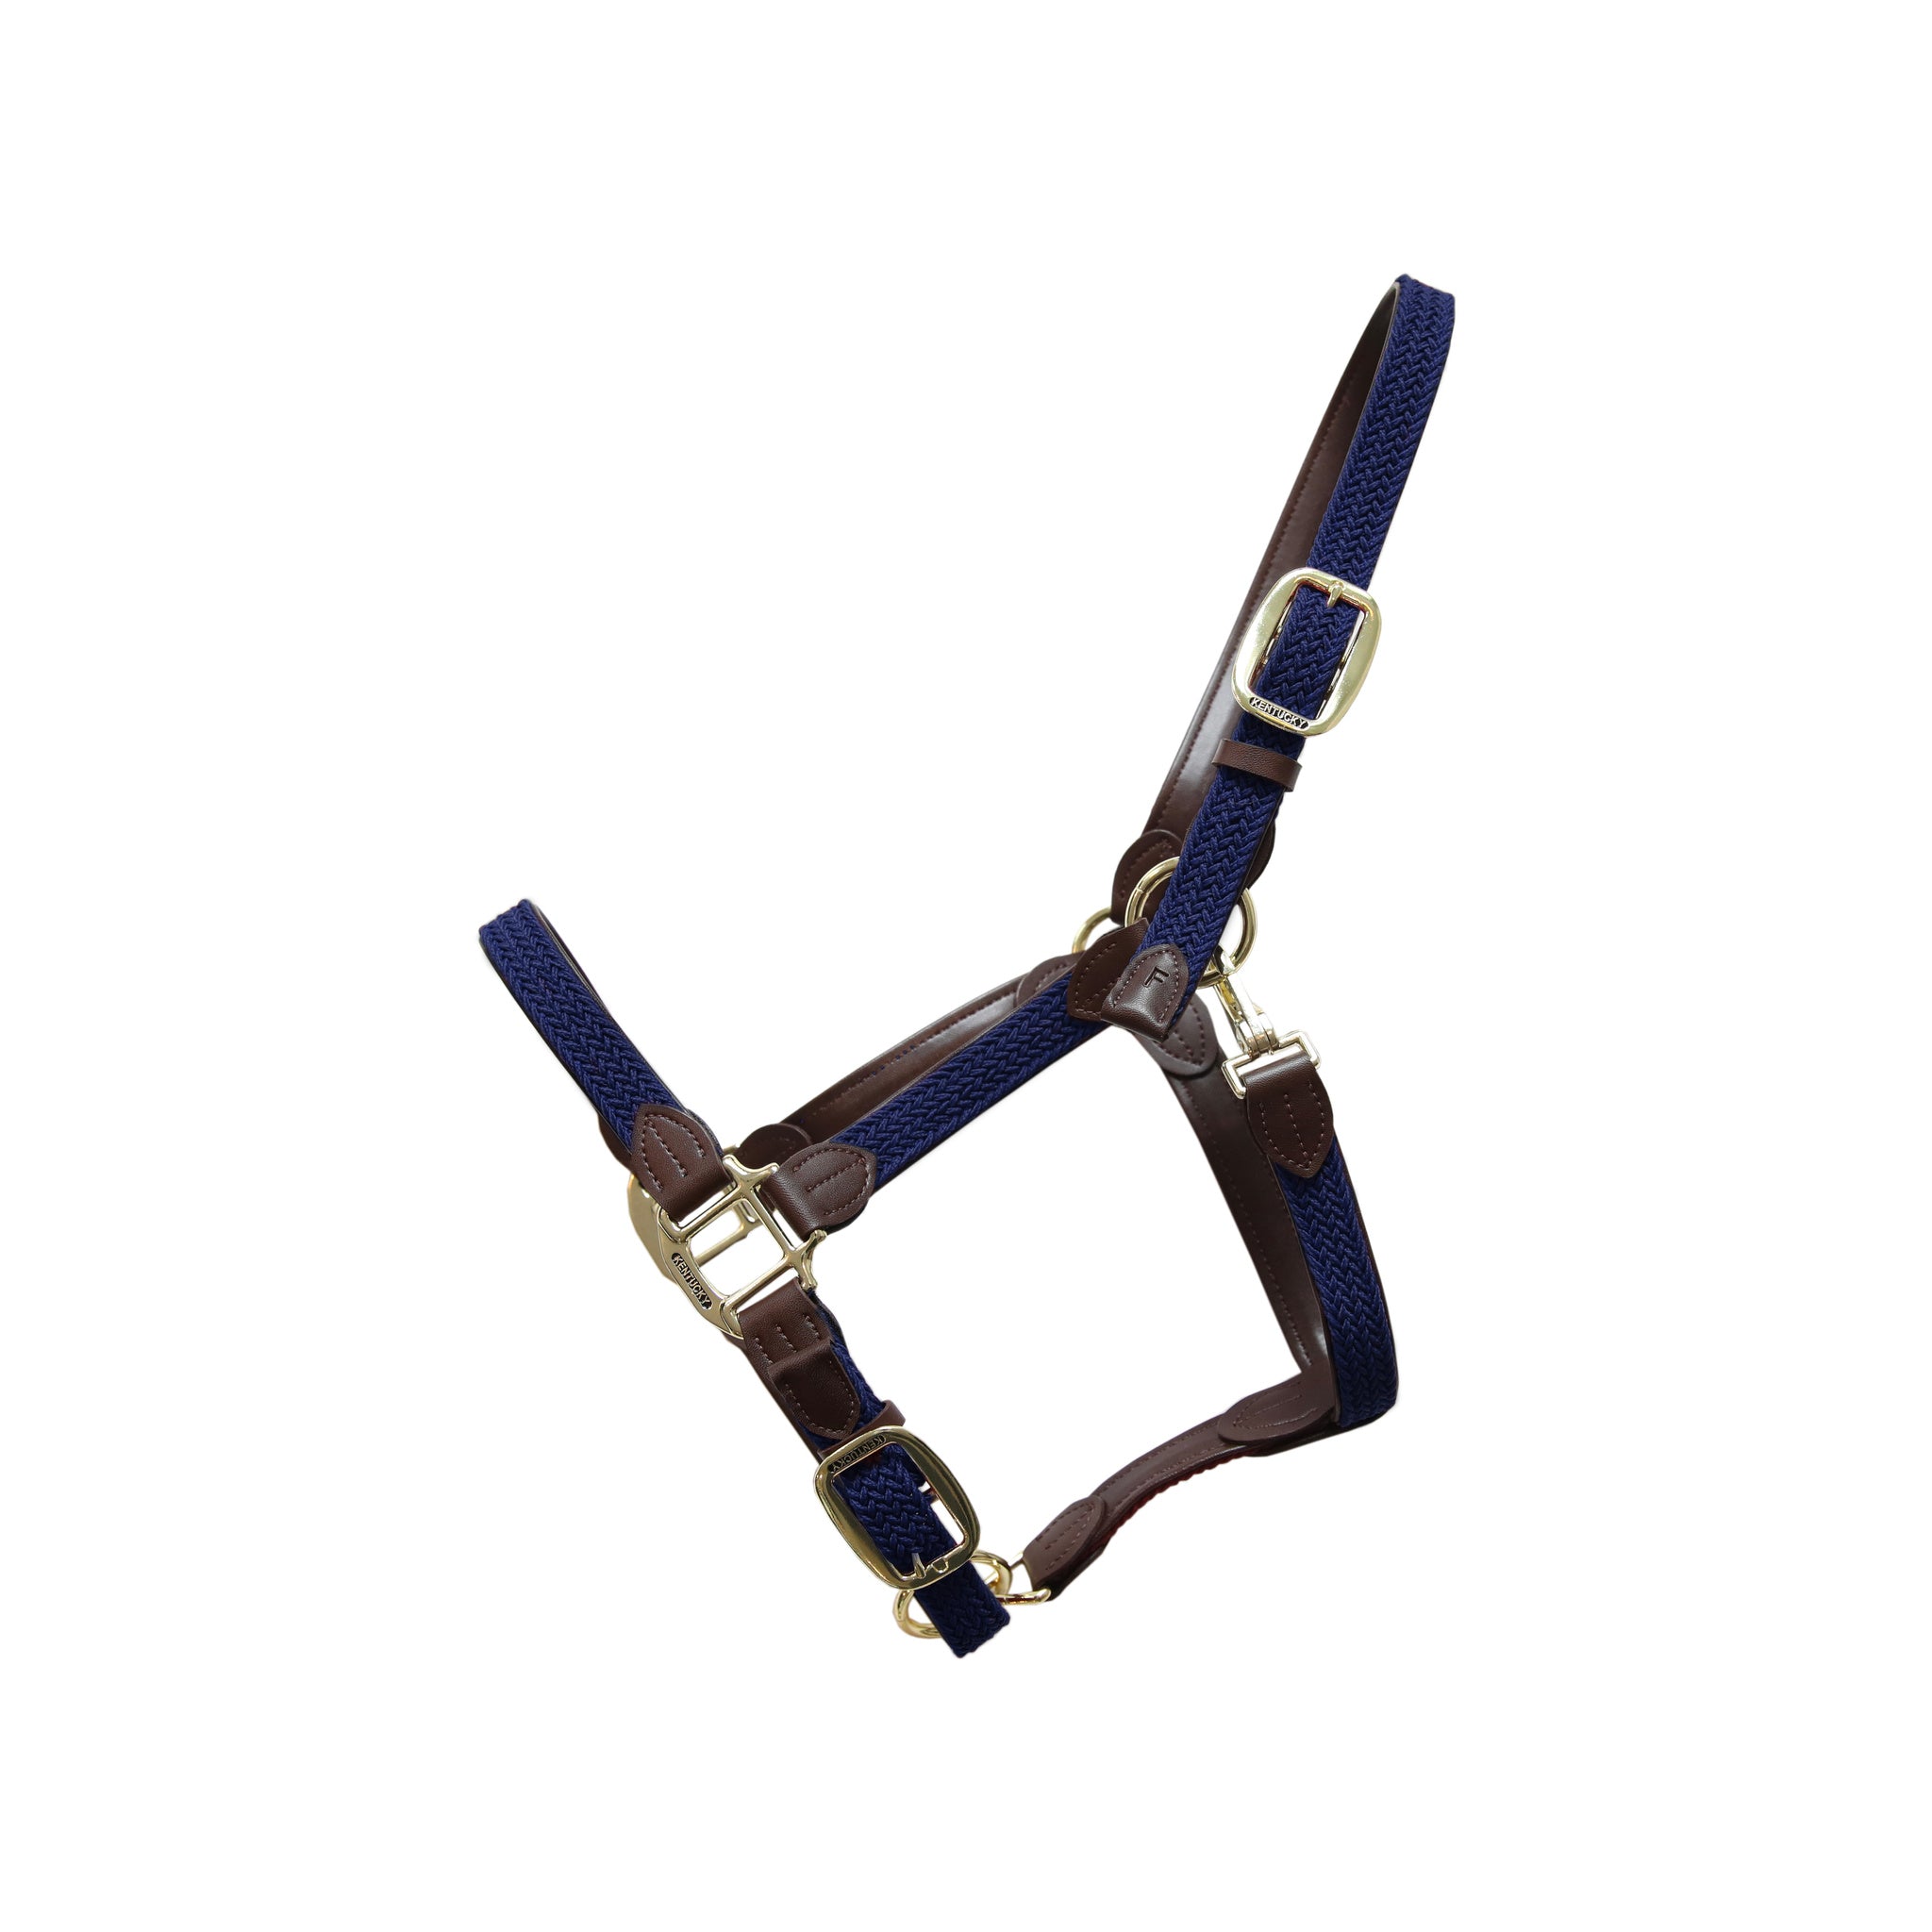 The Plaited Nylon Halter is made of artificial leather (100% animal friendly) and has a nylon braided design. This artificial leather does not absorb water or dirt, does not break or change color. 